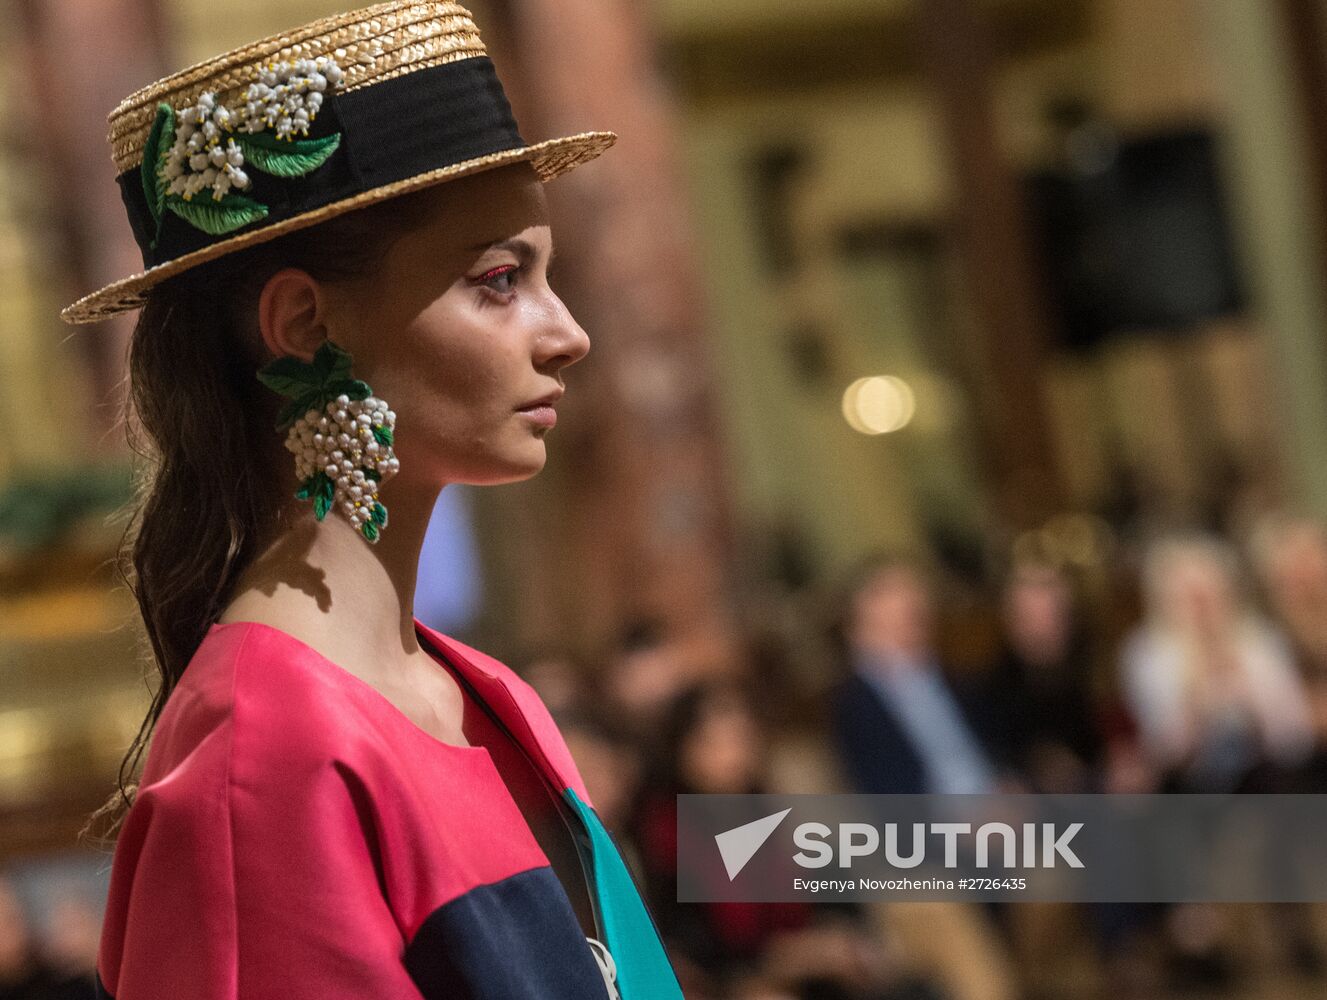 Moscow. Fashion designer Alexander Arutyunov shows off his collection during 'Made in Russia' fashion week